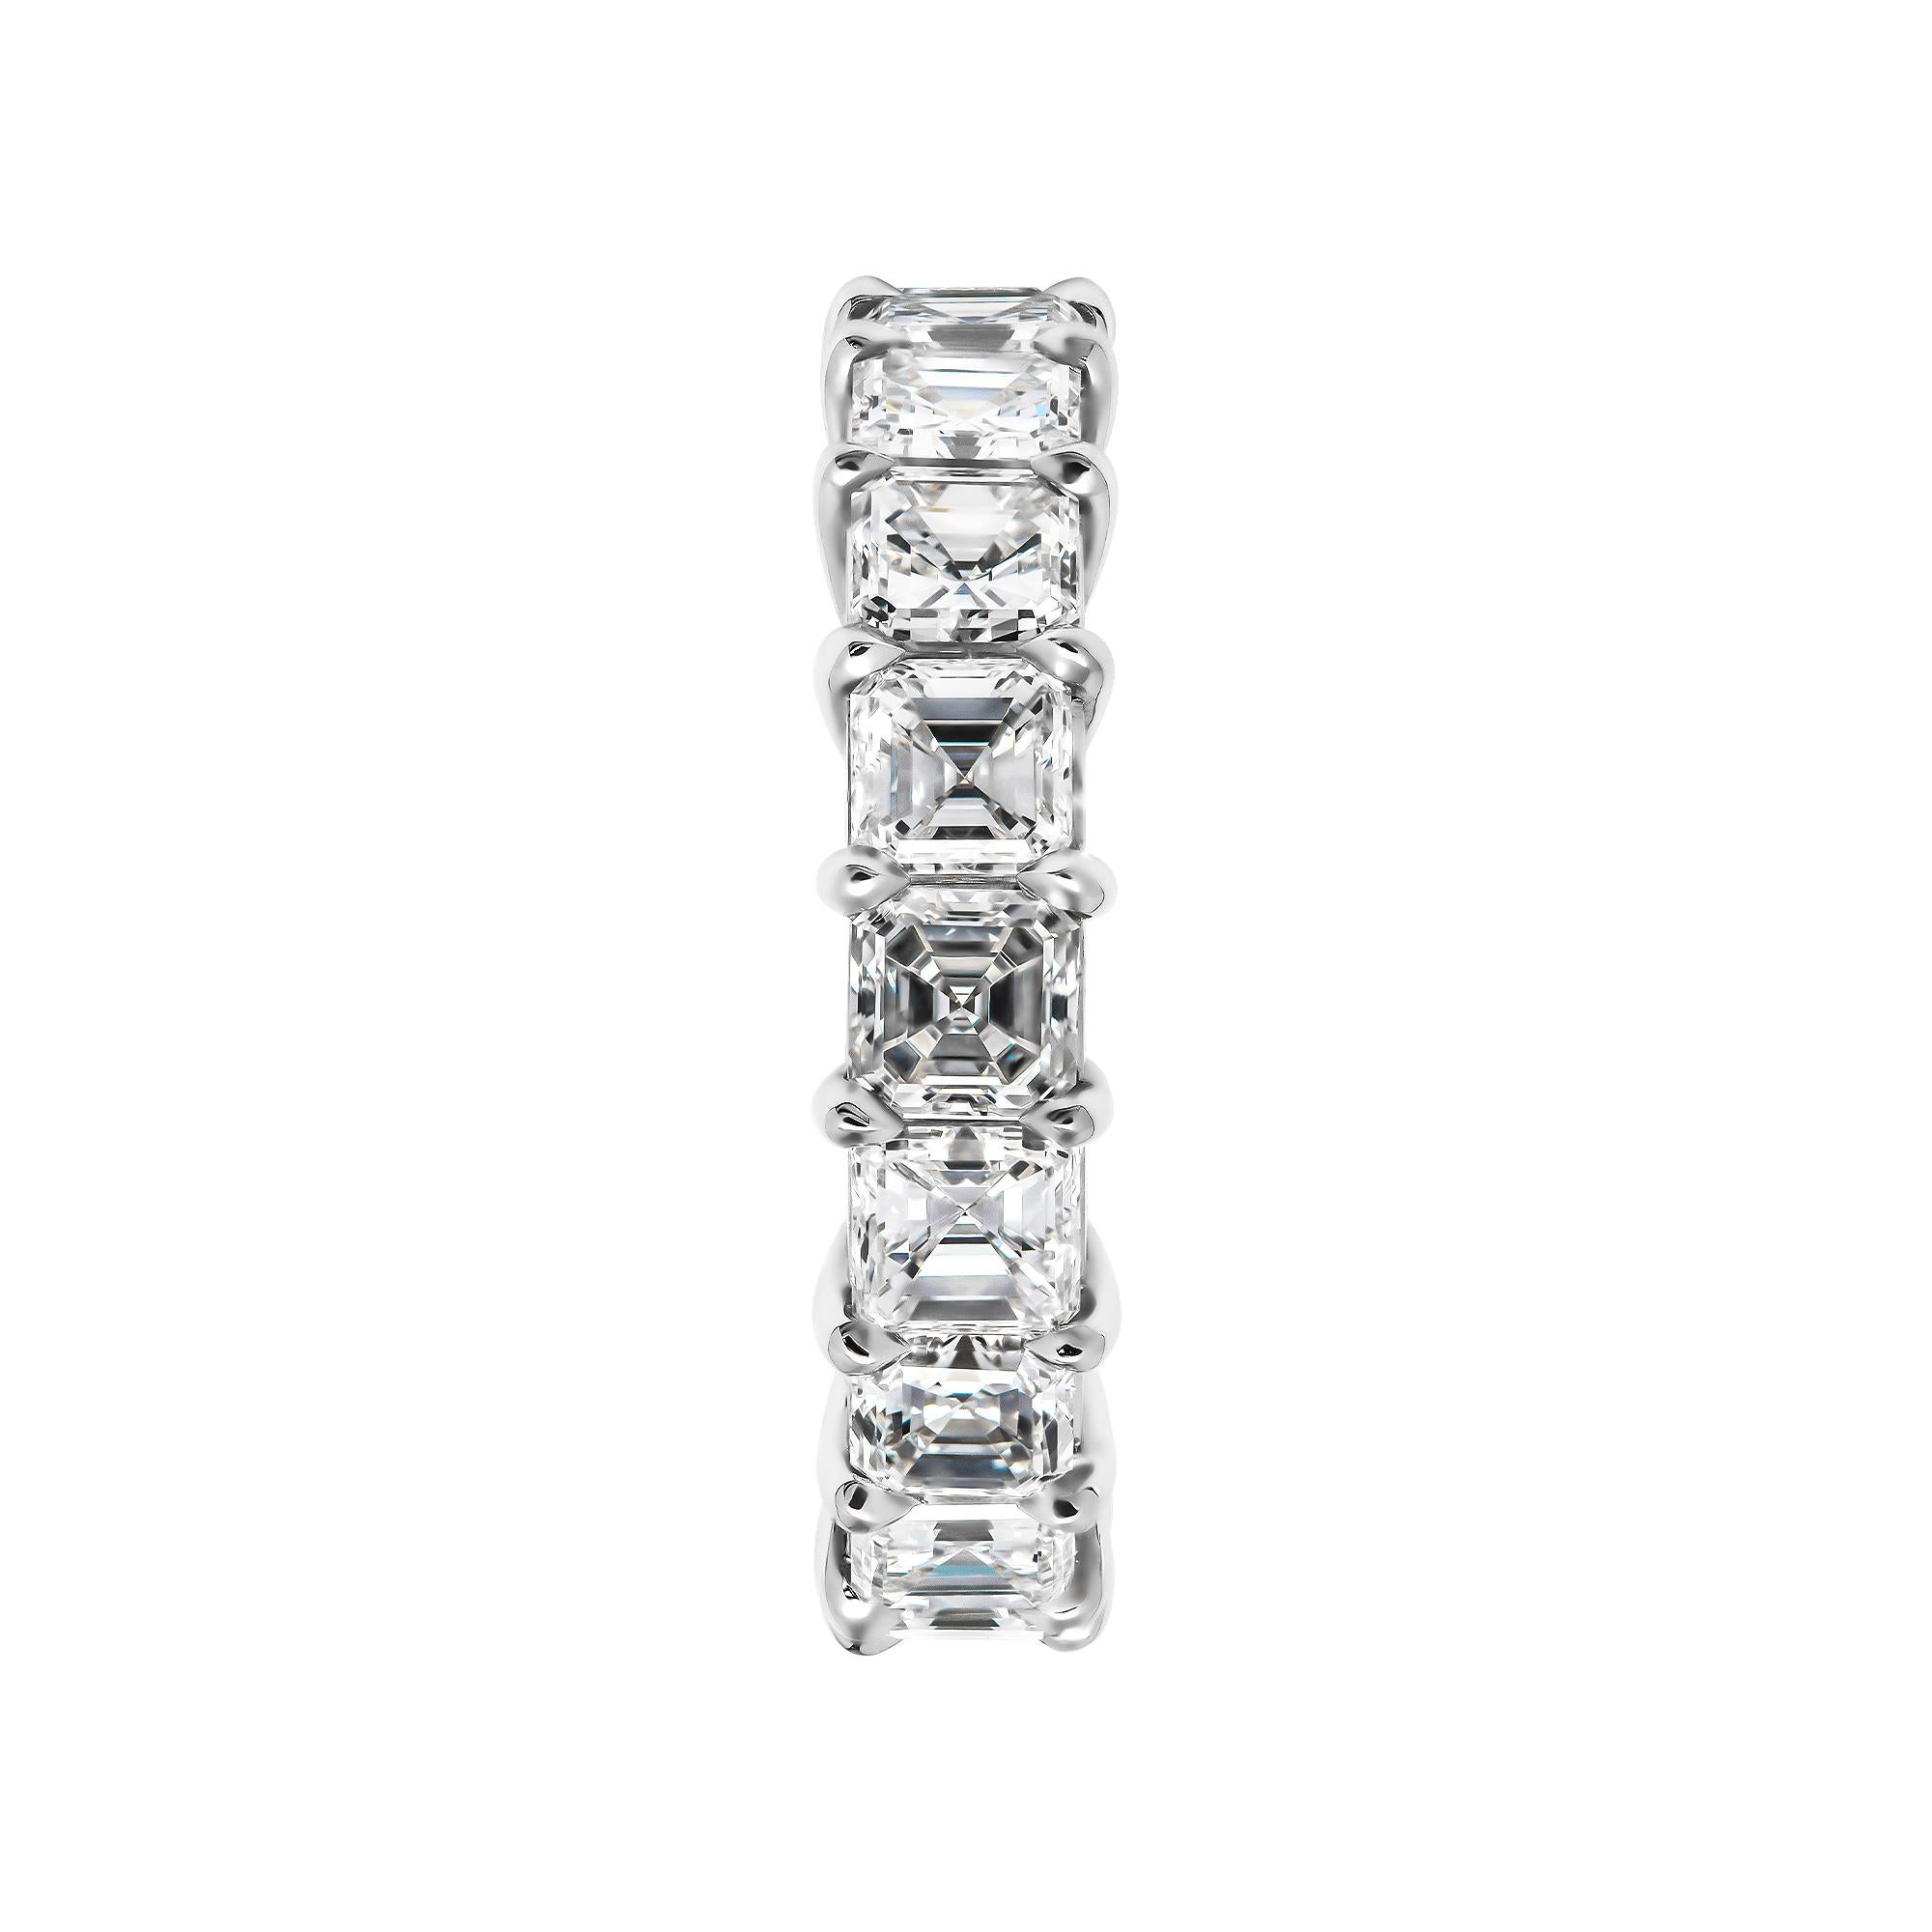 Eternity band with 5.75ct Asscher Cut Diamonds
Mounted in Platinum 950, 18 Asscher cut diamonds won't miss a sparkle!
Beautiful step cut, bold and classy 
All diamonds are G-H color and VS clarity 
Designed and manufactured by M&V Vanguard Jewelry